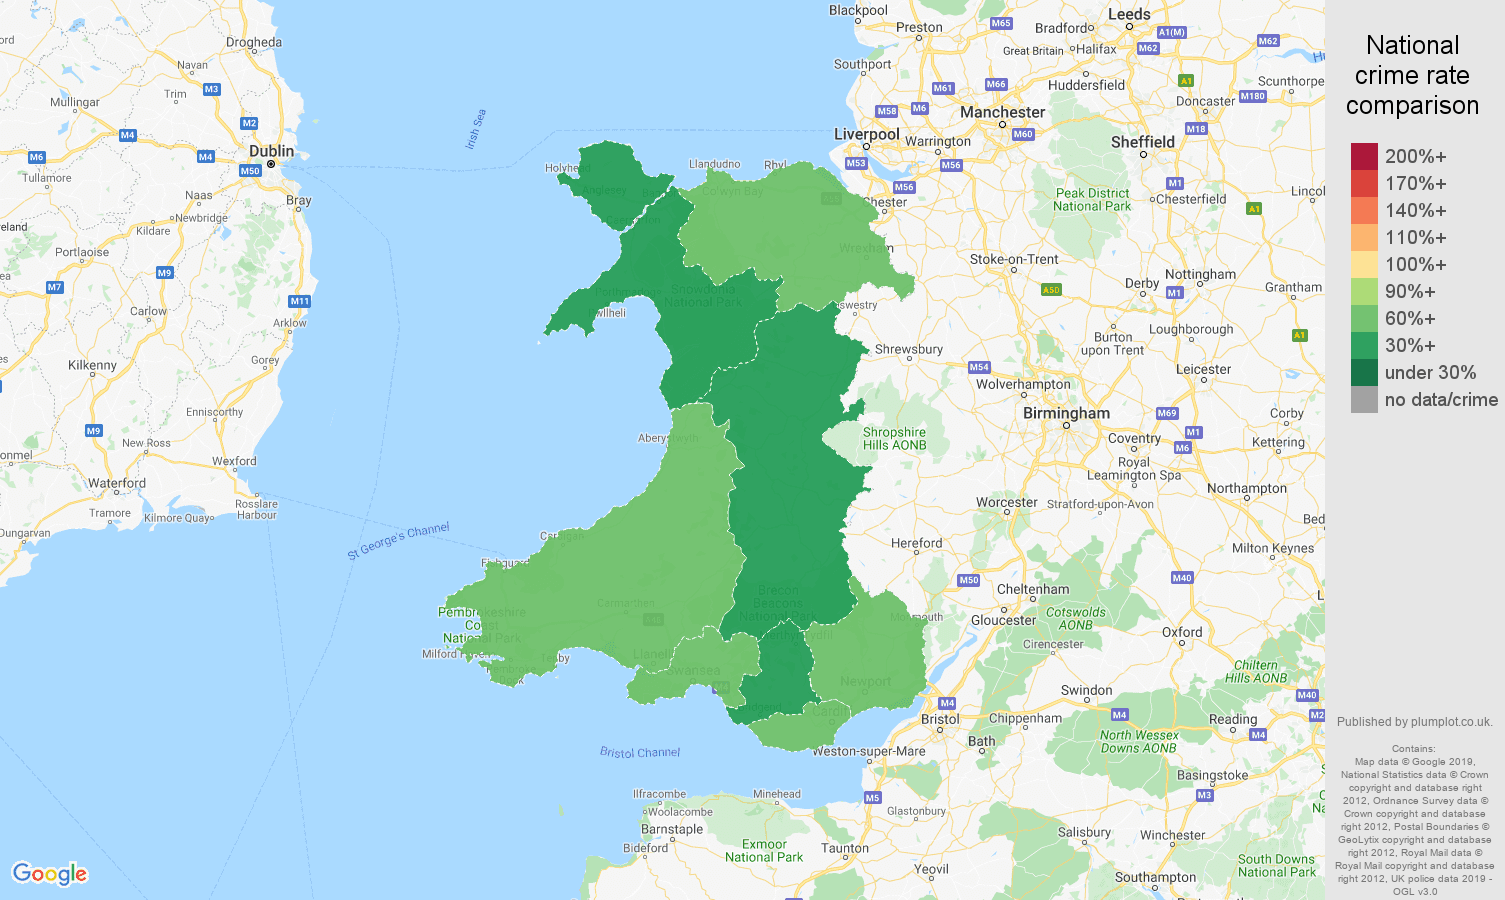 Wales possession of weapons crime rate comparison map